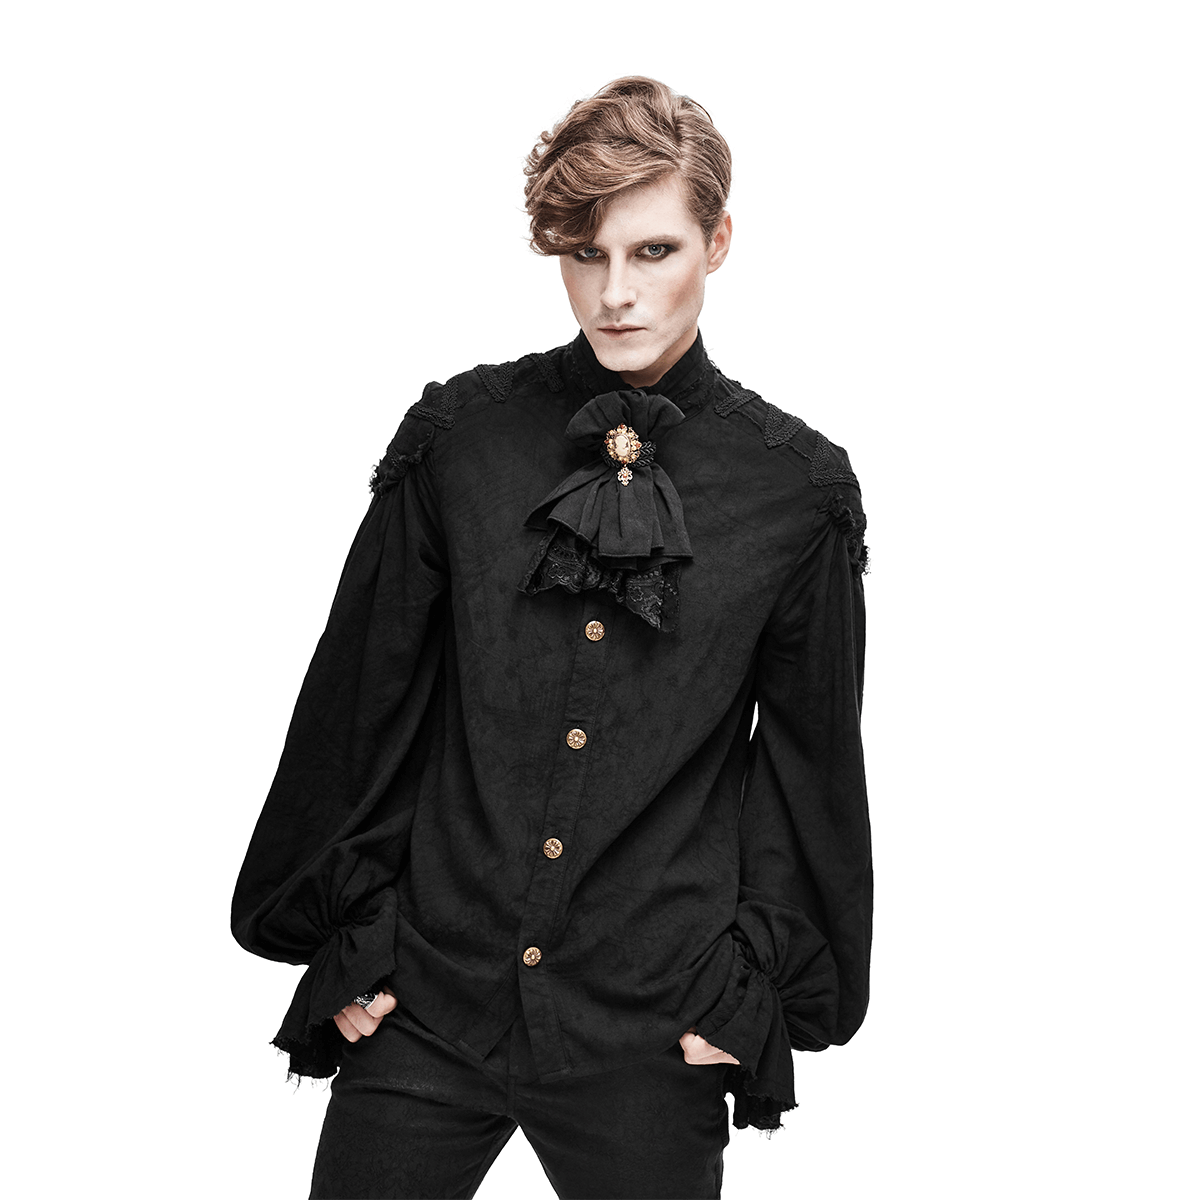 Black Long Sleeves Shirt with Buttons in Front / Gothic Style Shirt with Flared Cuffs - HARD'N'HEAVY